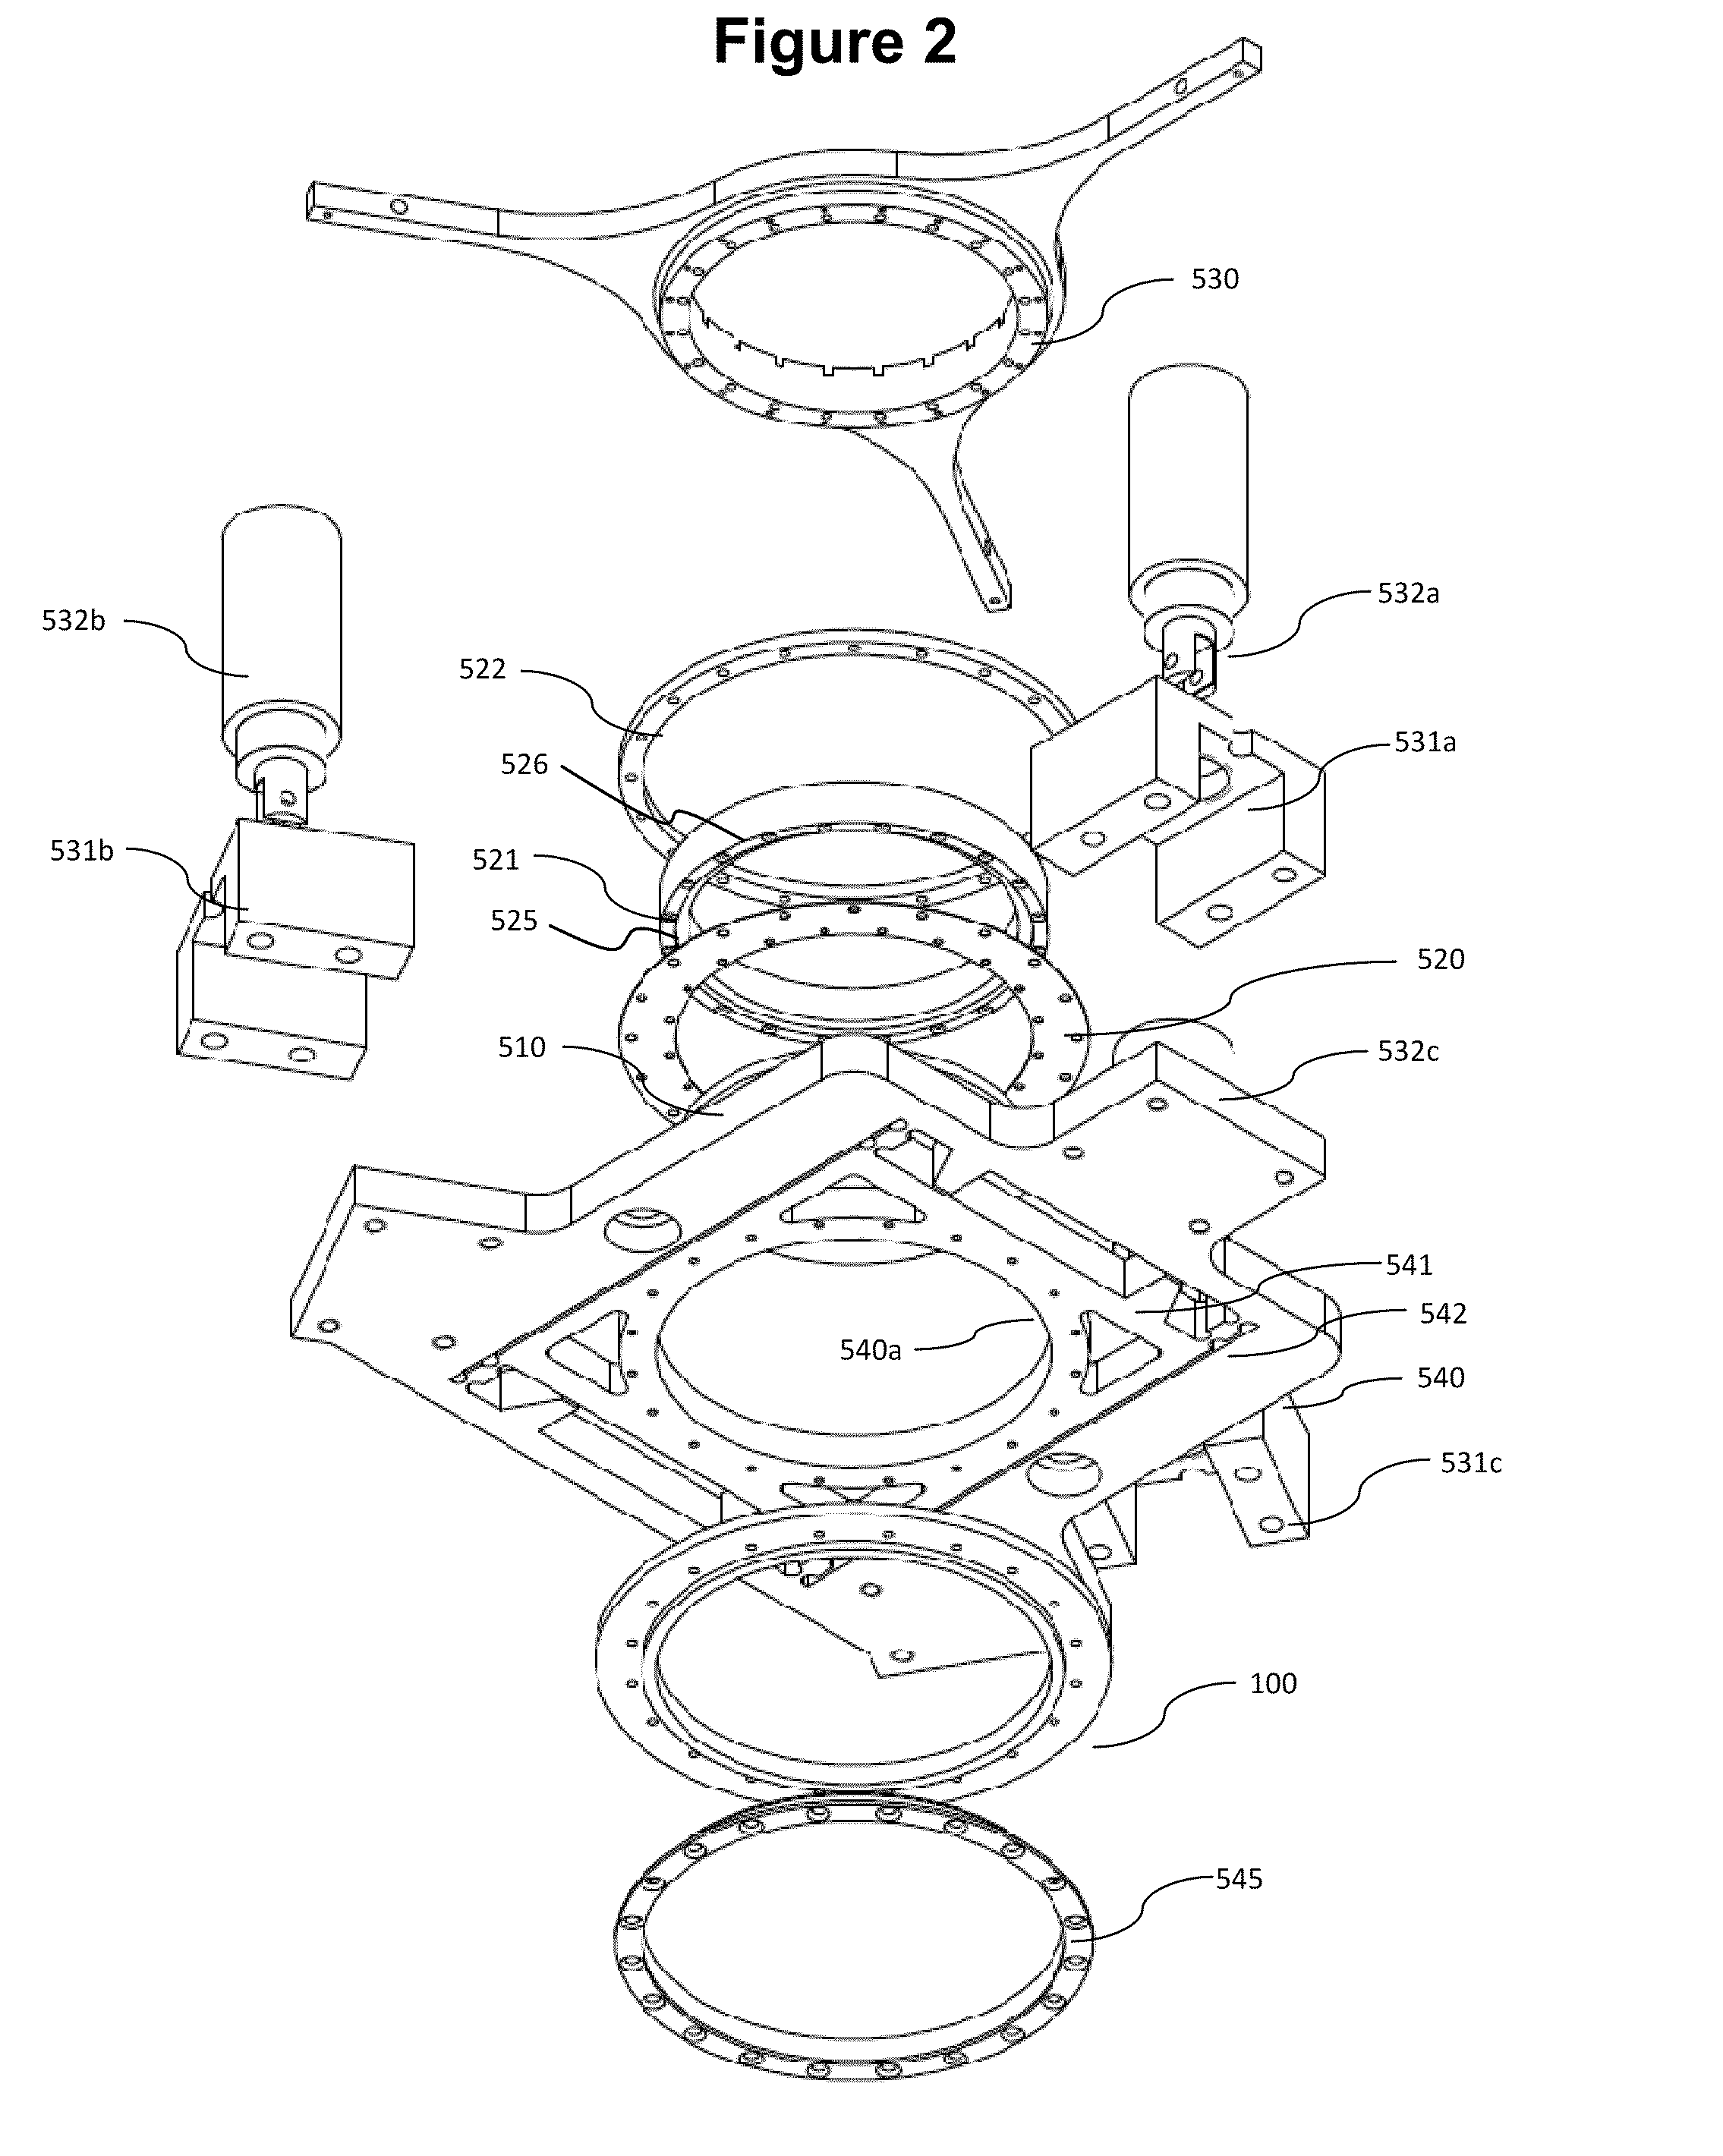 Vacuum coupled tool apparatus for dry transfer printing semiconductor elements